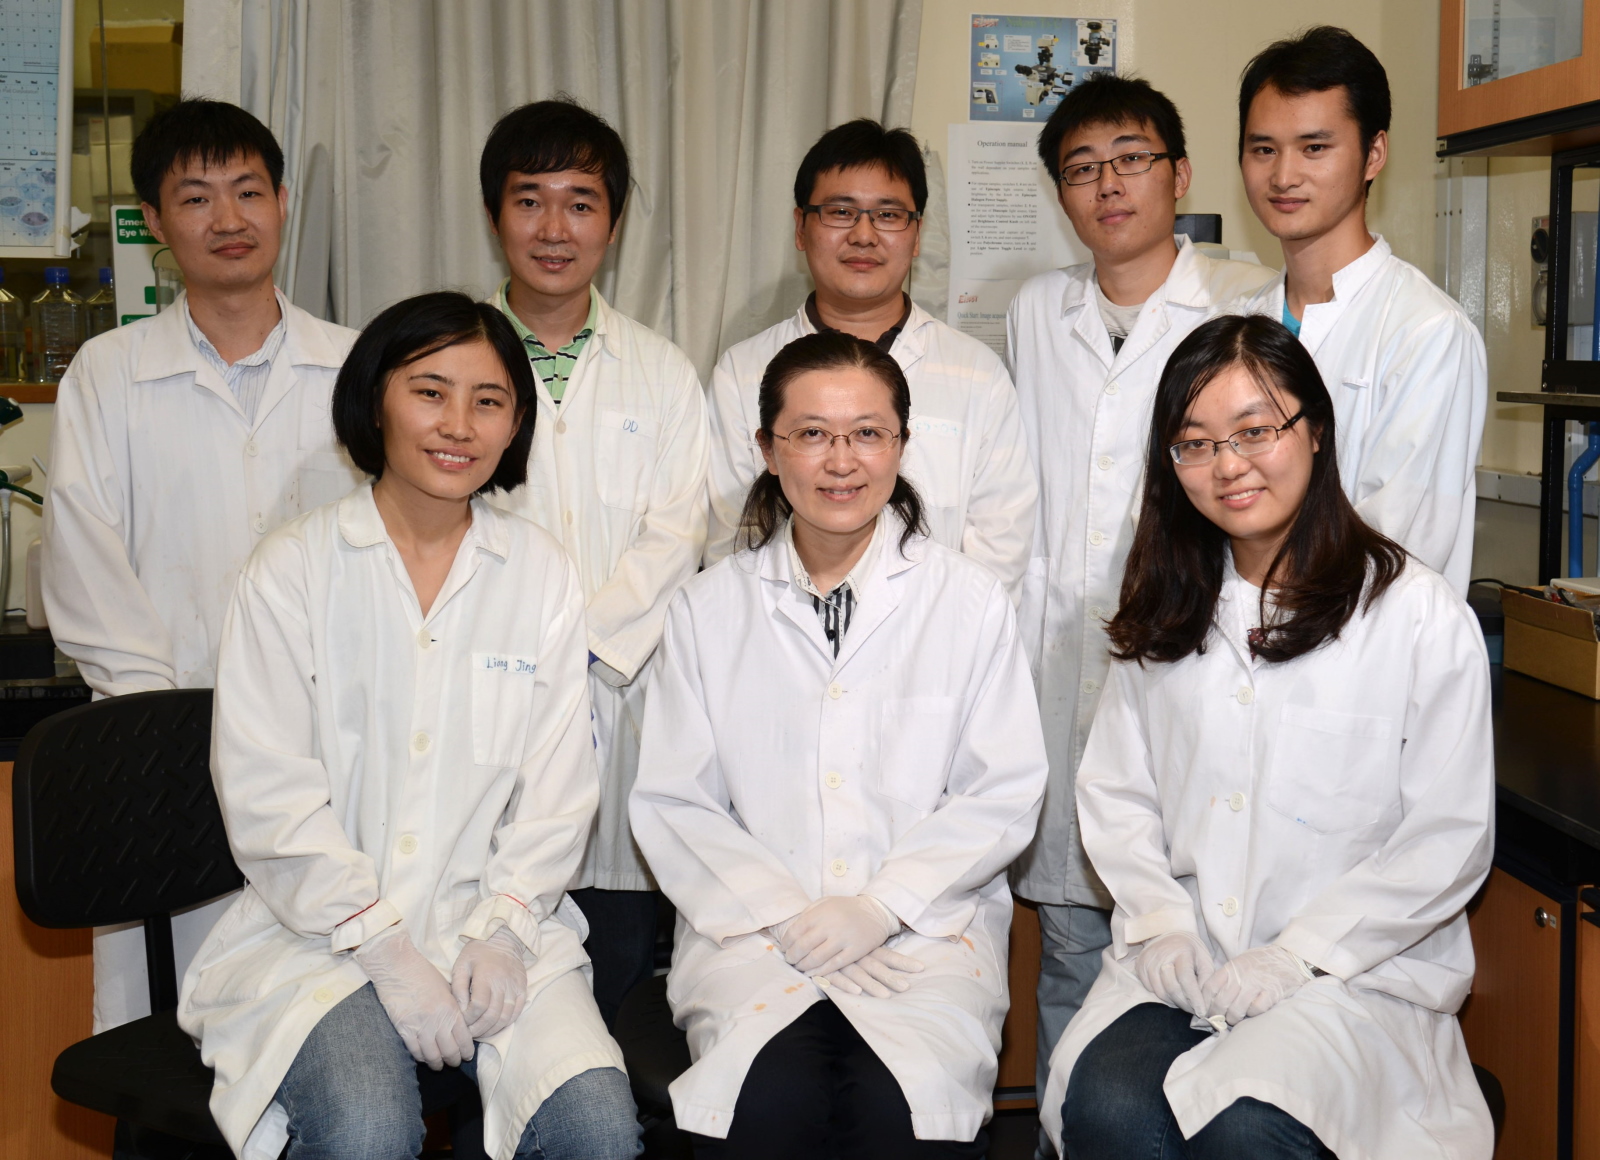 Professor Bin Liu (center front) with members of her research team.